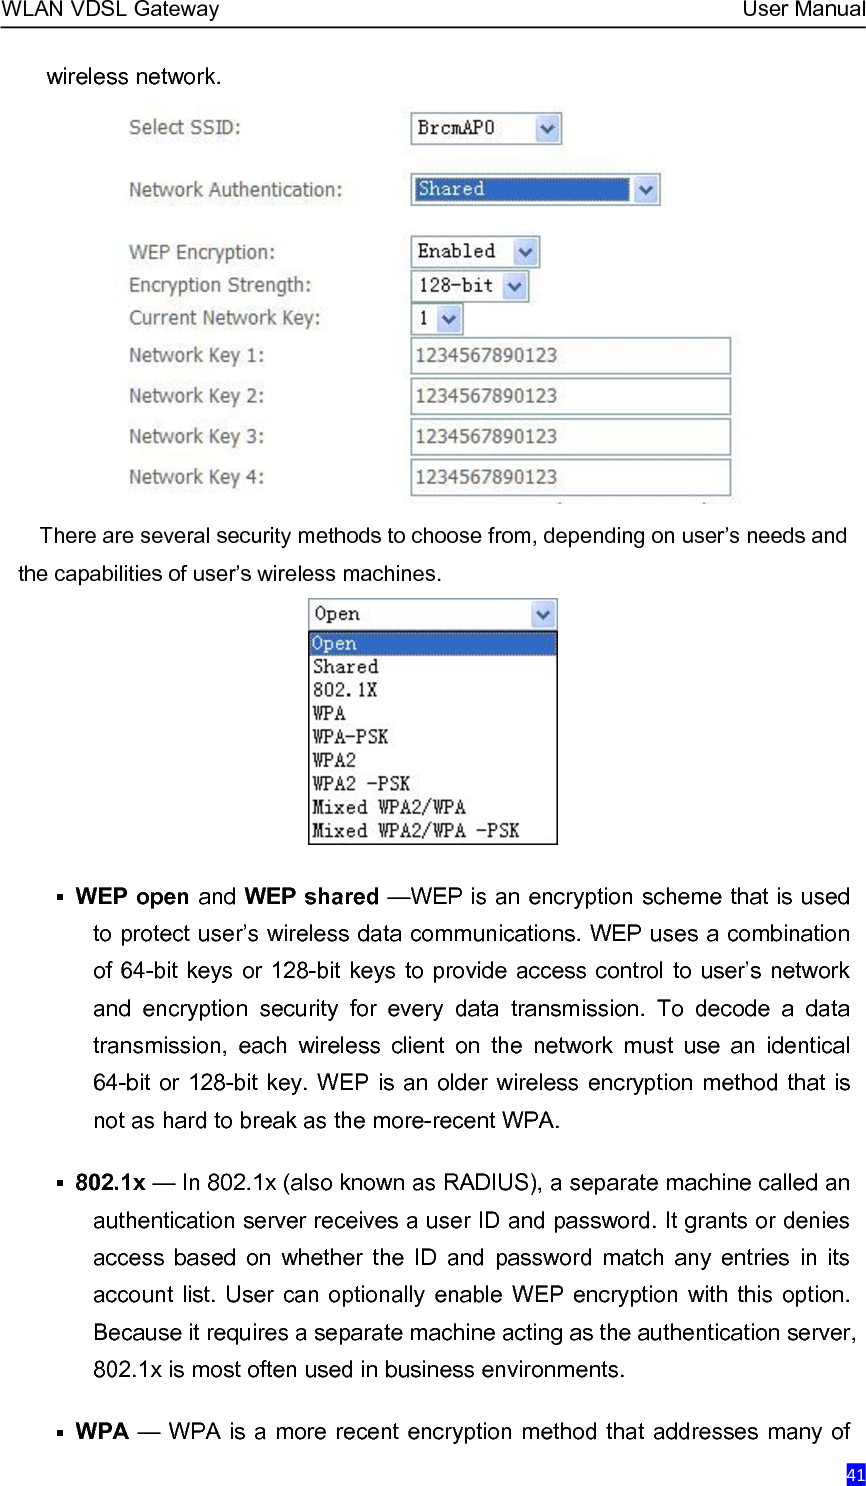 WLAN VDSL Gateway User Manual41wireless network.There are several security methods to choose from, depending on user’s needs andthe capabilities of user’s wireless machines.WEP open and WEP shared —WEP is an encryption scheme that is usedto protect user’s wireless data communications. WEP uses a combinationof 64-bit keys or 128-bit keys to provide access control to user’s networkand encryption security for every data transmission. To decode a datatransmission, each wireless client on the network must use an identical64-bit or 128-bit key. WEP is an older wireless encryption method that isnot as hard to break as the more-recent WPA.802.1x — In 802.1x (also known as RADIUS), a separate machine called anauthentication server receives a user ID and password. It grants or deniesaccess based on whether the ID and password match any entries in itsaccount list. User can optionally enable WEP encryption with this option.Because it requires a separate machine acting as the authentication server,802.1x is most often used in business environments.WPA — WPA is a more recent encryption method that addresses many of